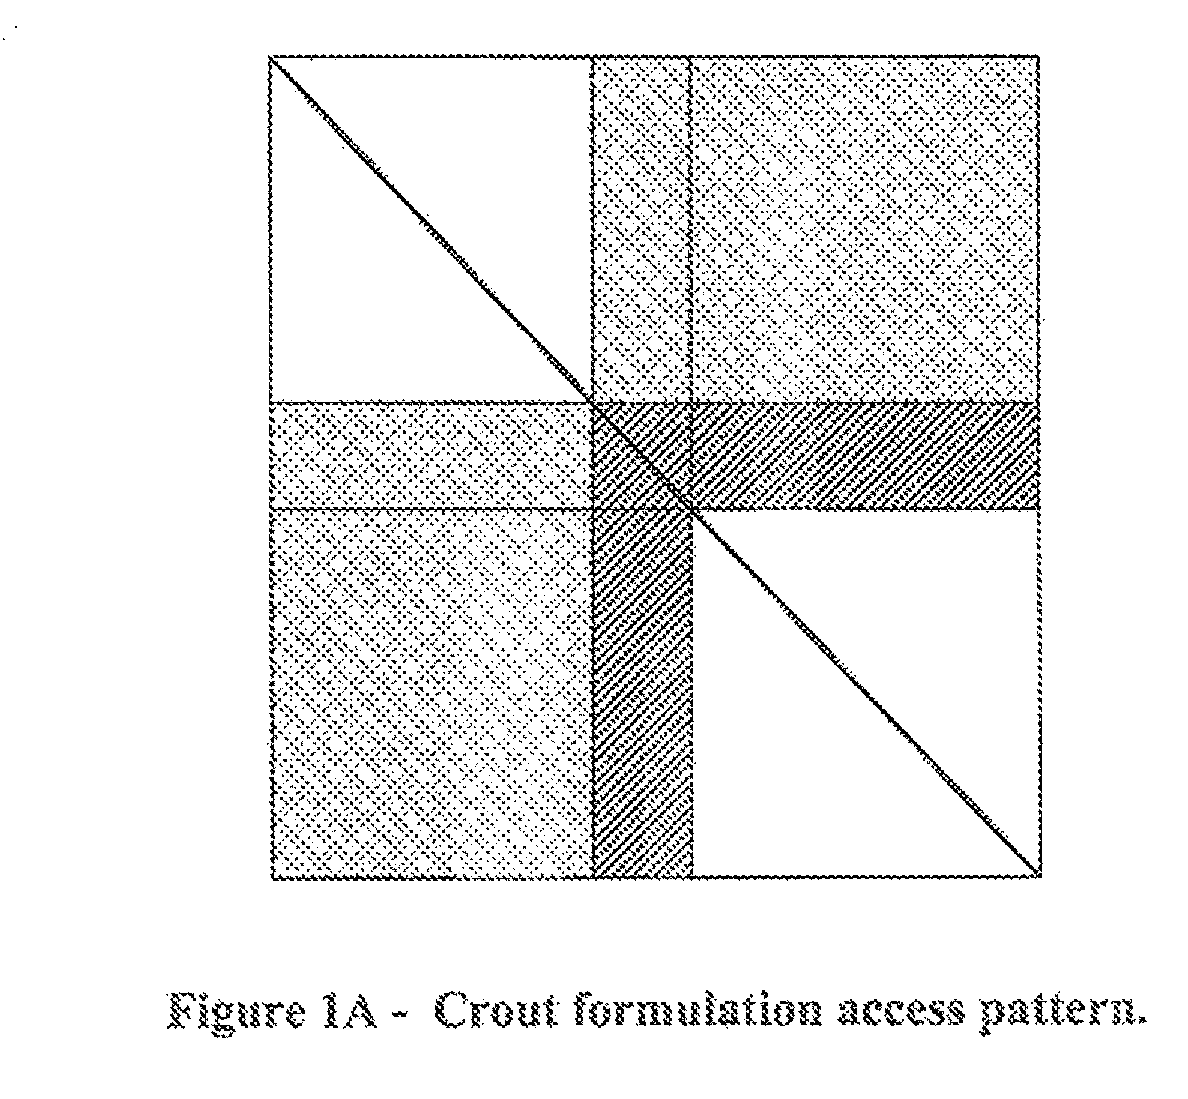 Method for using a graphics processing unit for accelerated iterative and direct solutions to systems of linear equations